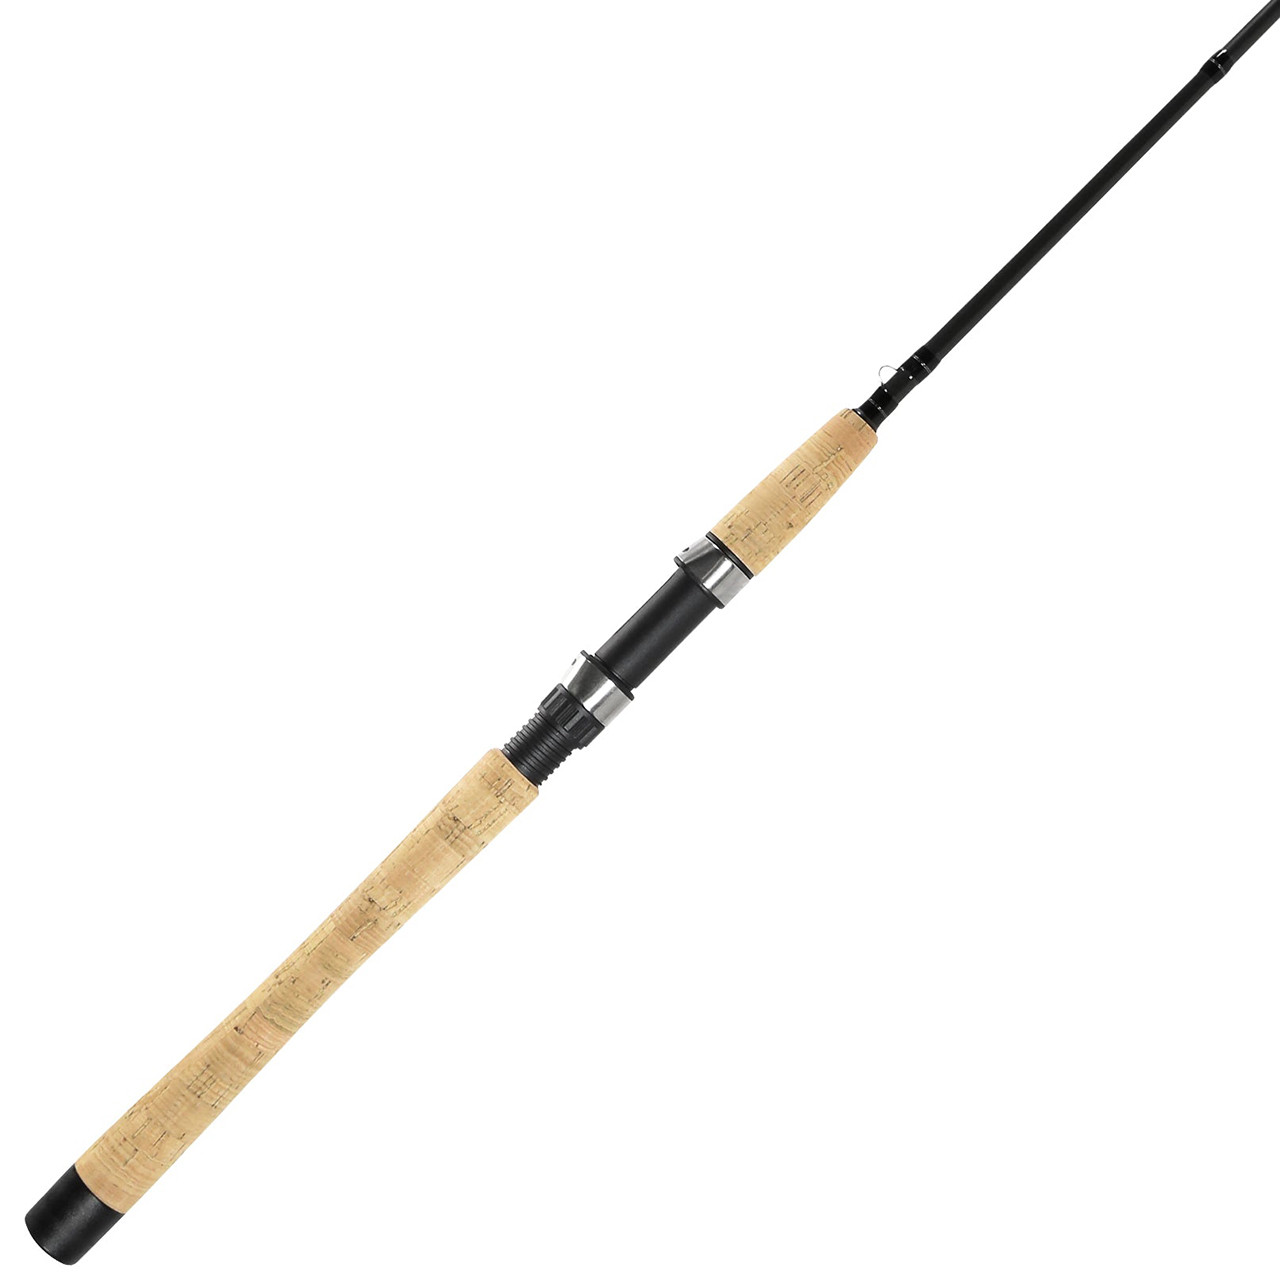 Lamiglas Graphite Freshwater Fishing Rods for sale